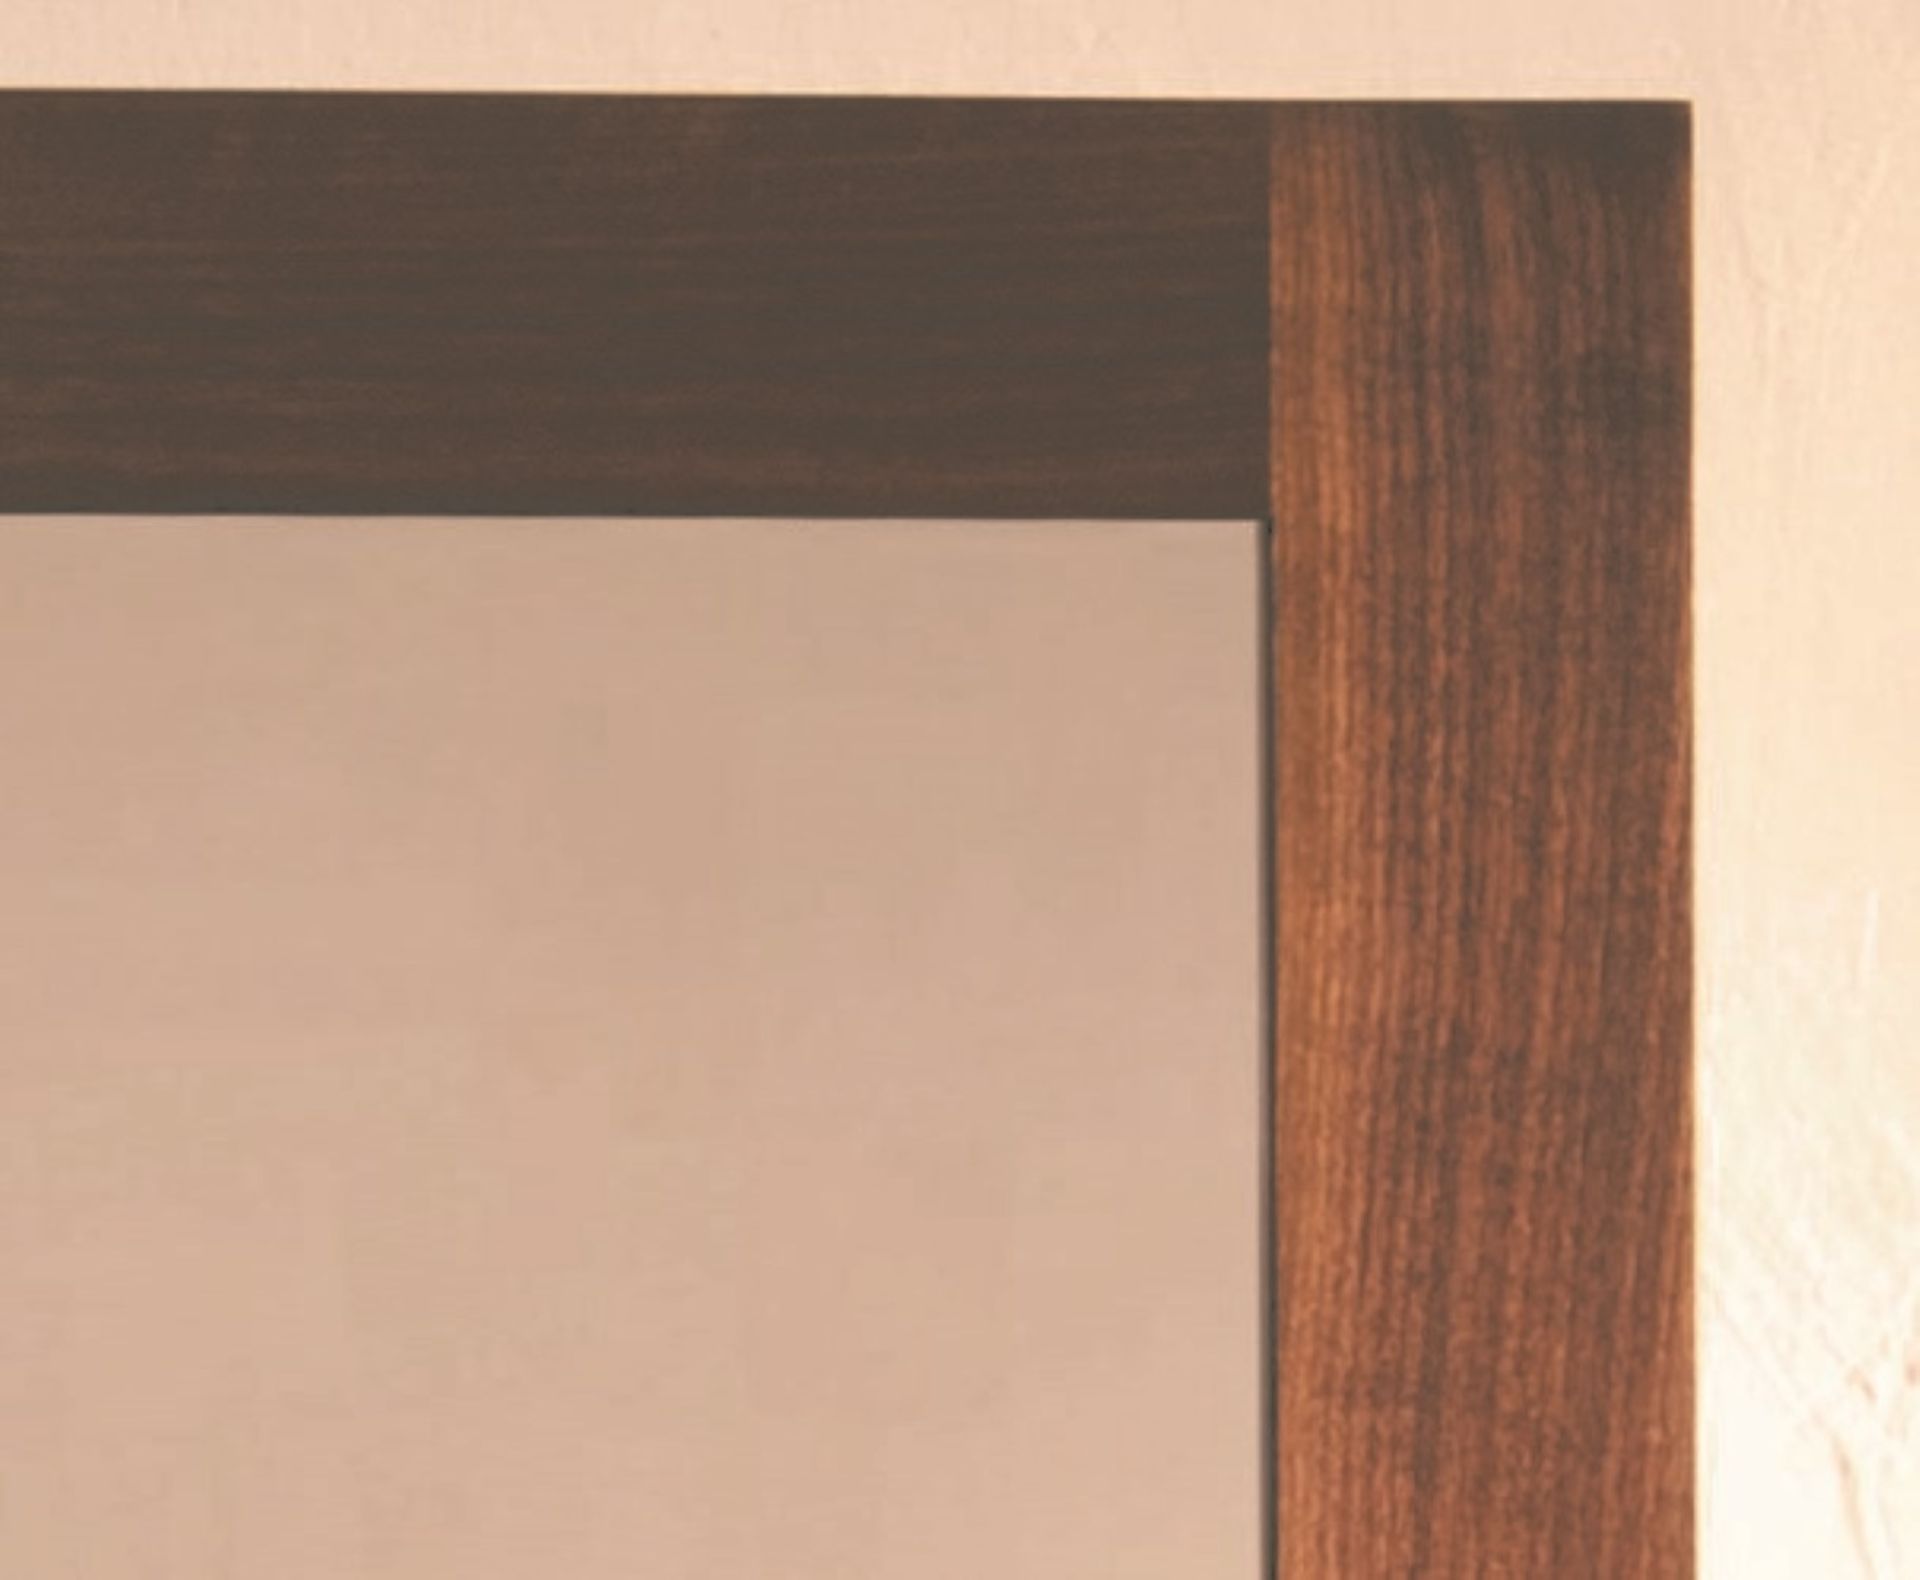 1 x Stonearth Bathroom Wall Mirror With Solid Walnut Frame and Bevelled Glass Mirror - Size: Large - Image 4 of 7